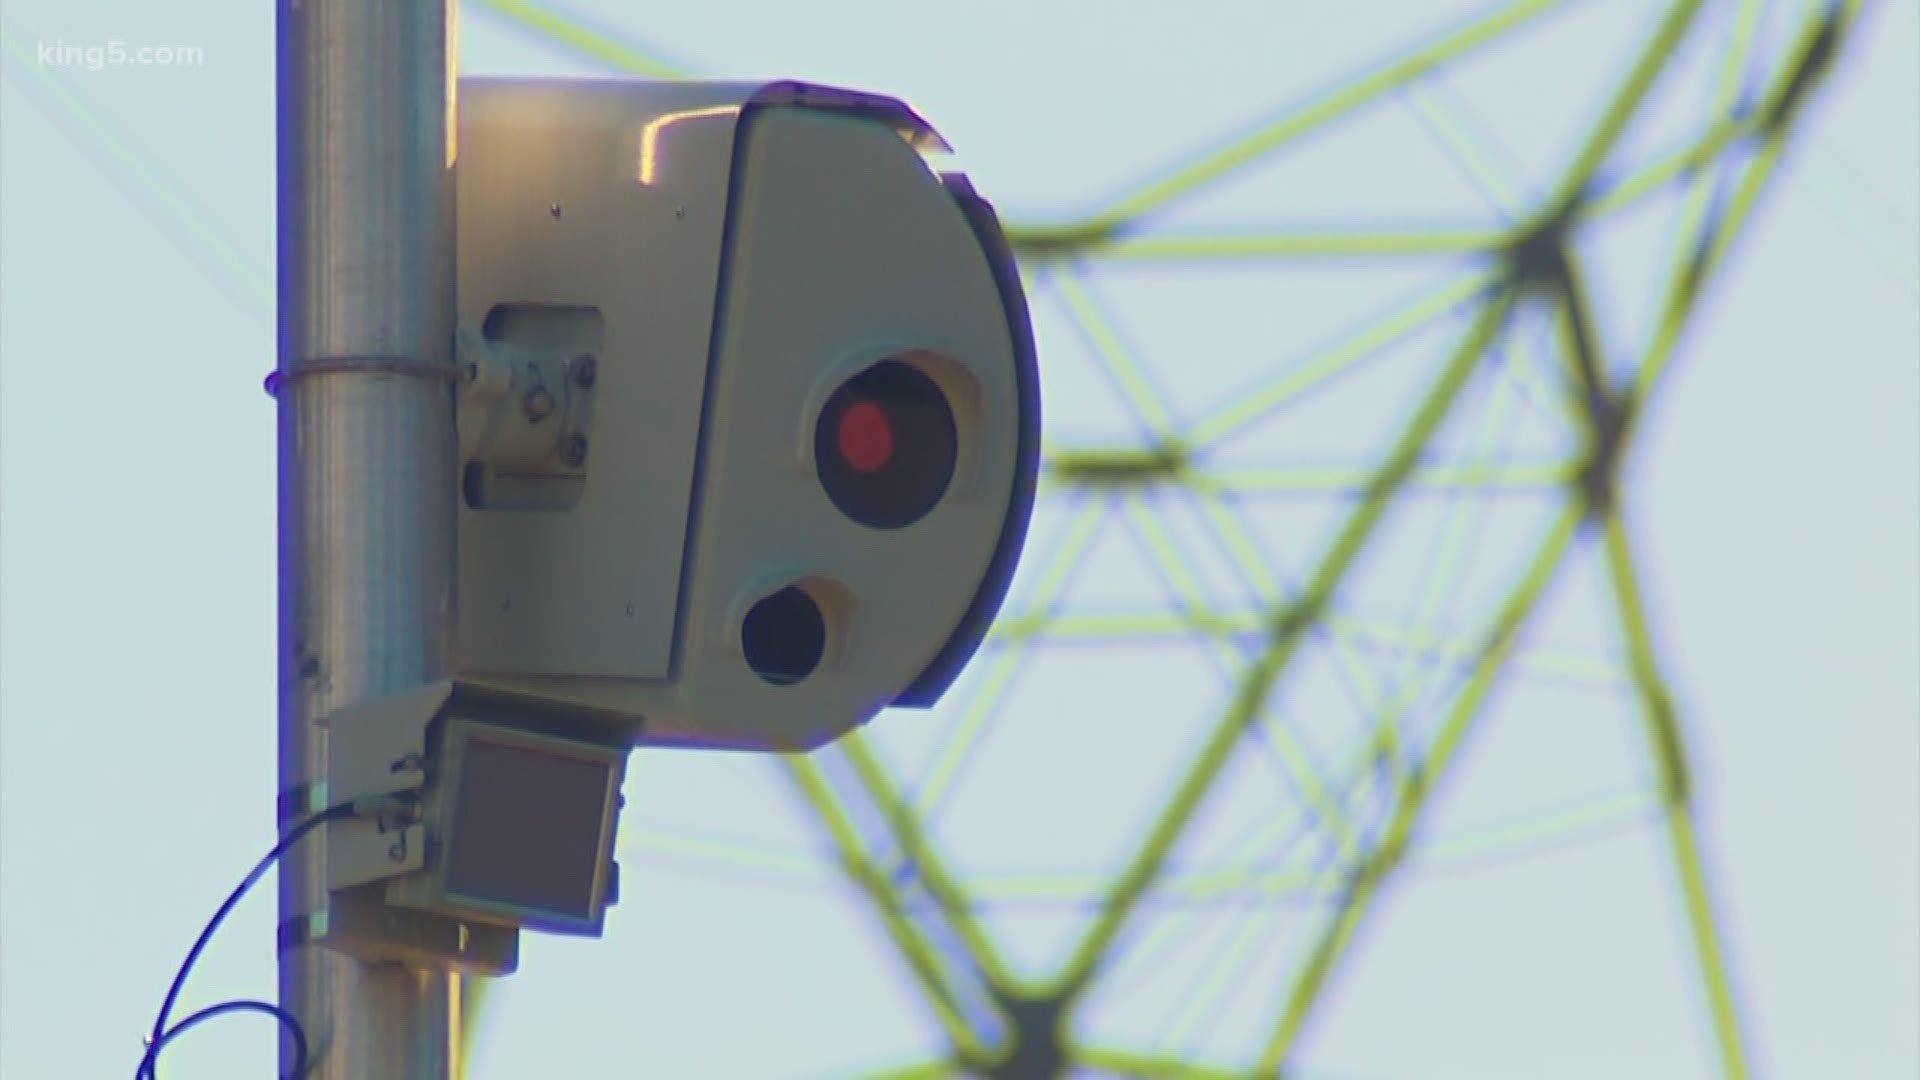 A red-light camera in Renton that caught the most red-light runners in the state did not accurately count crashes in 2017.